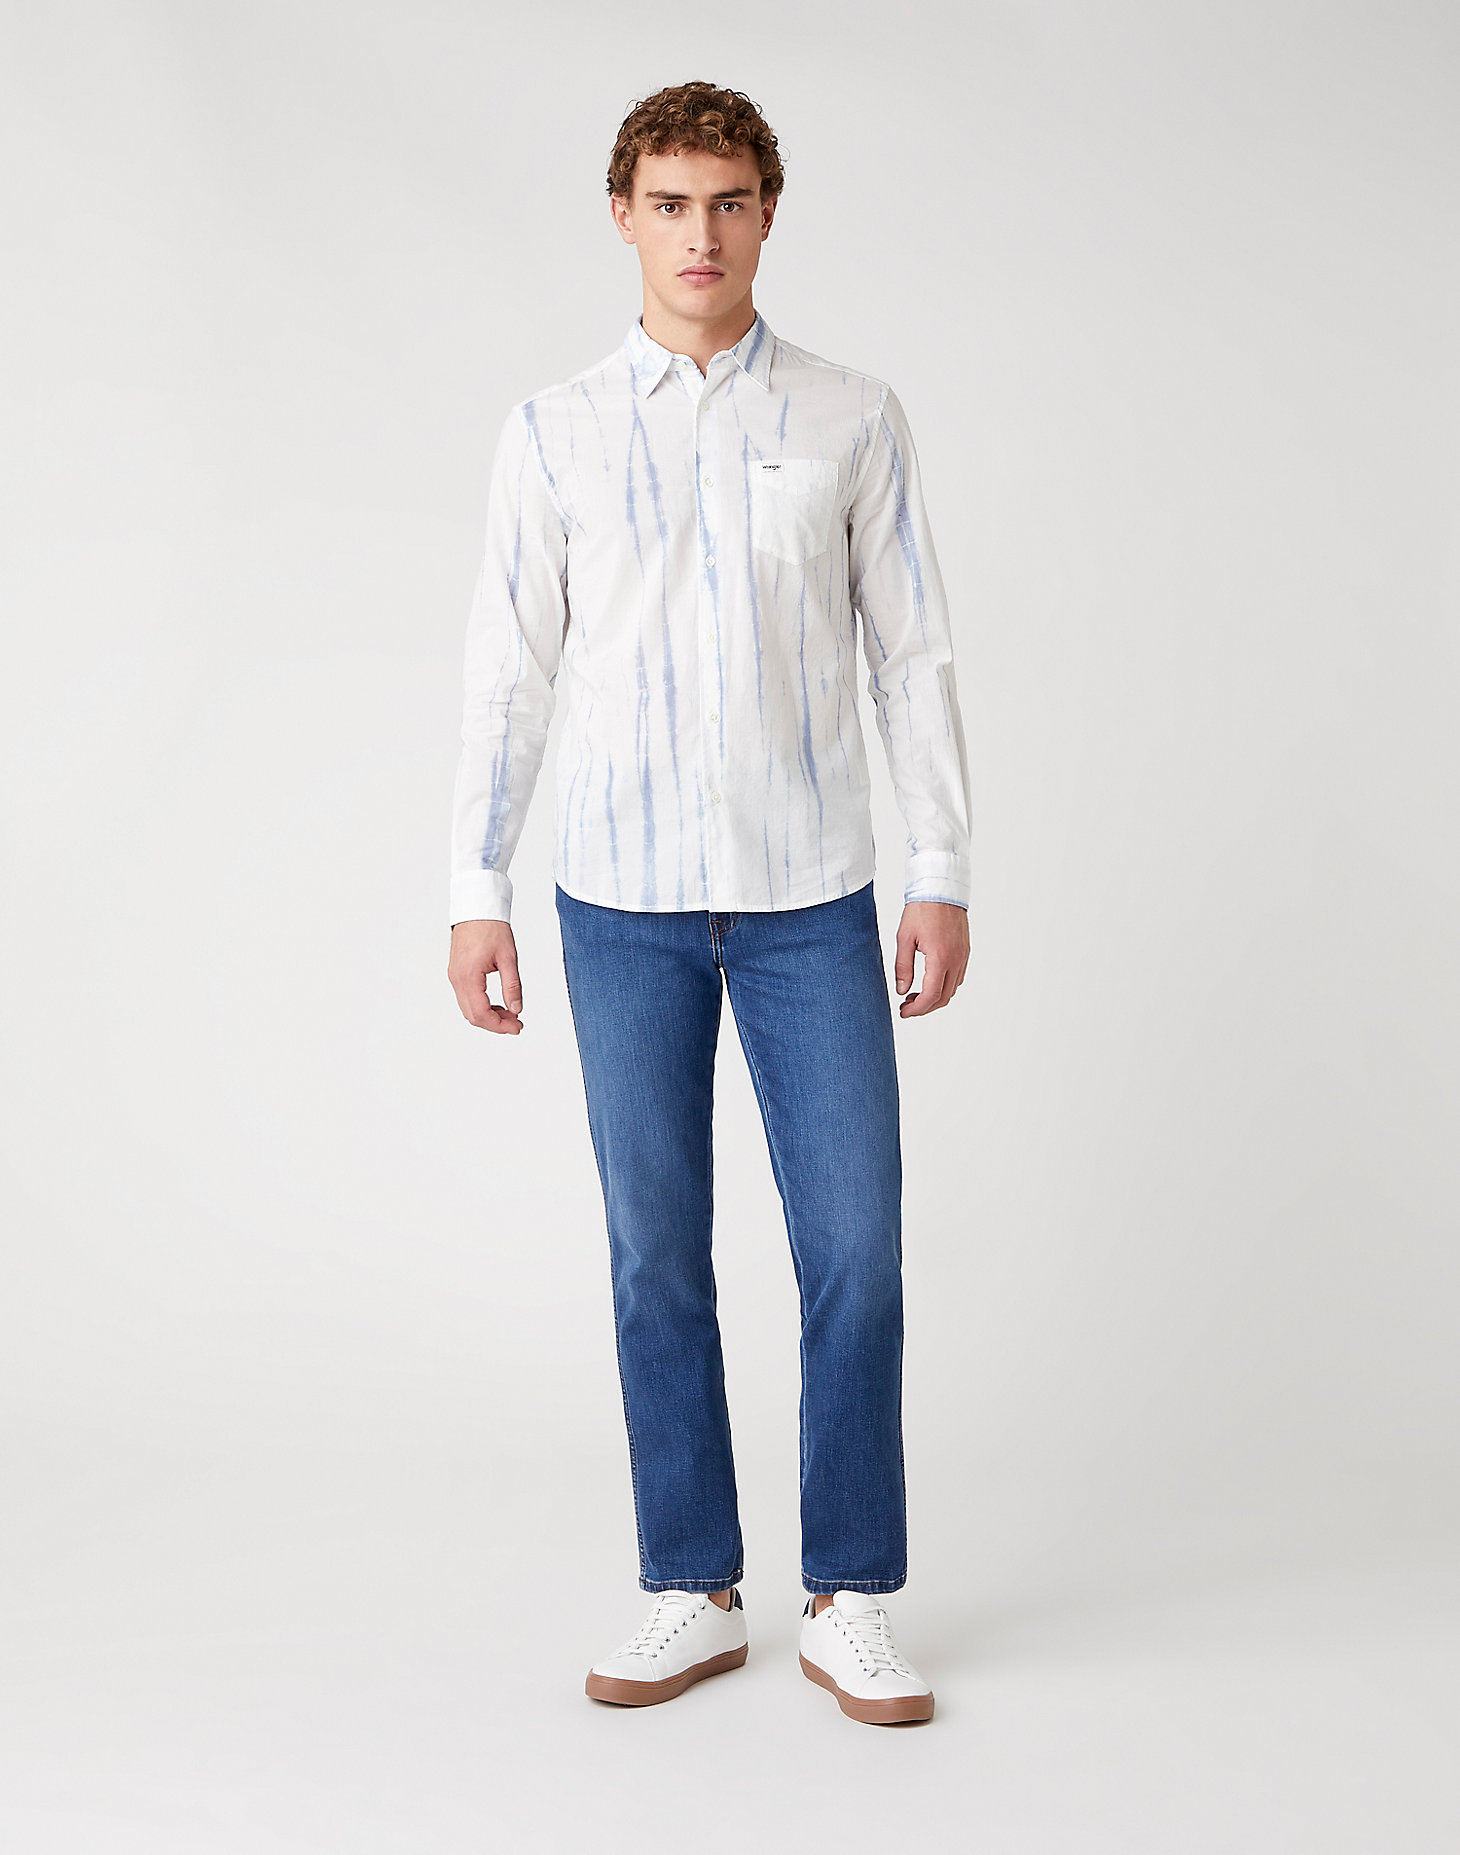 Long Sleeve One Pocket Shirt in White alternative view 4